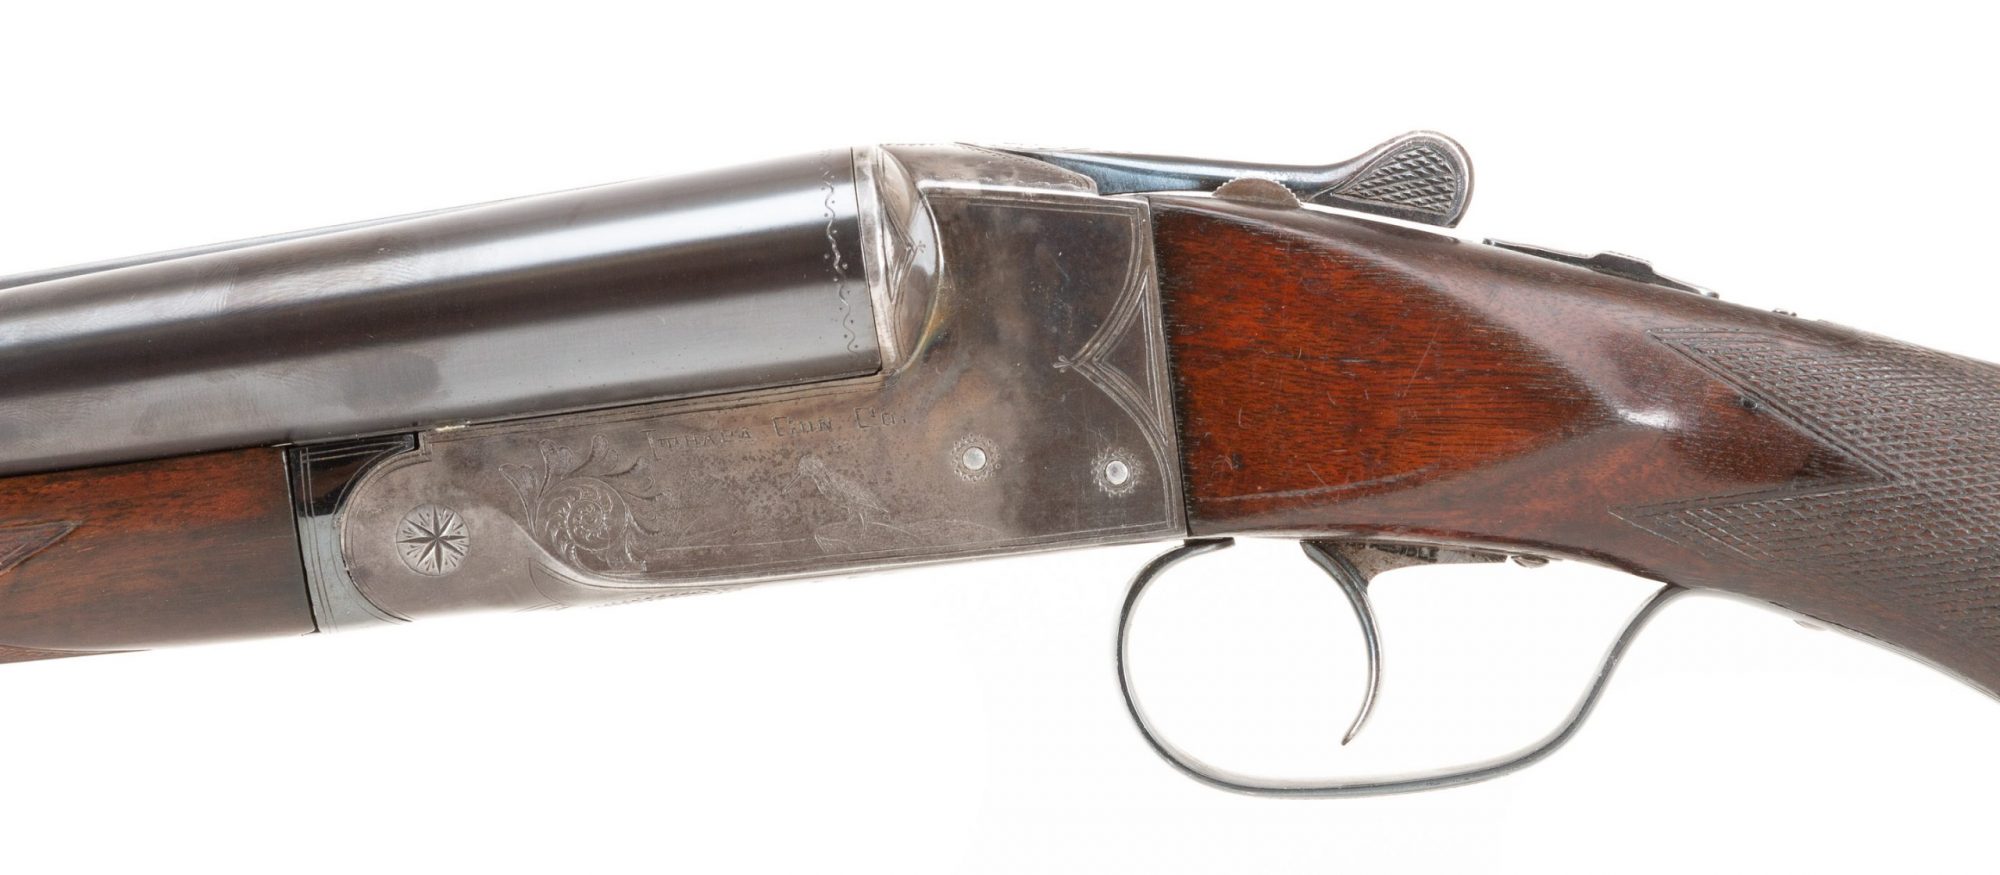 Photo of pre-owned Ithaca Double 12 gauge shotgun, sold as-is by Turnbull Restoration